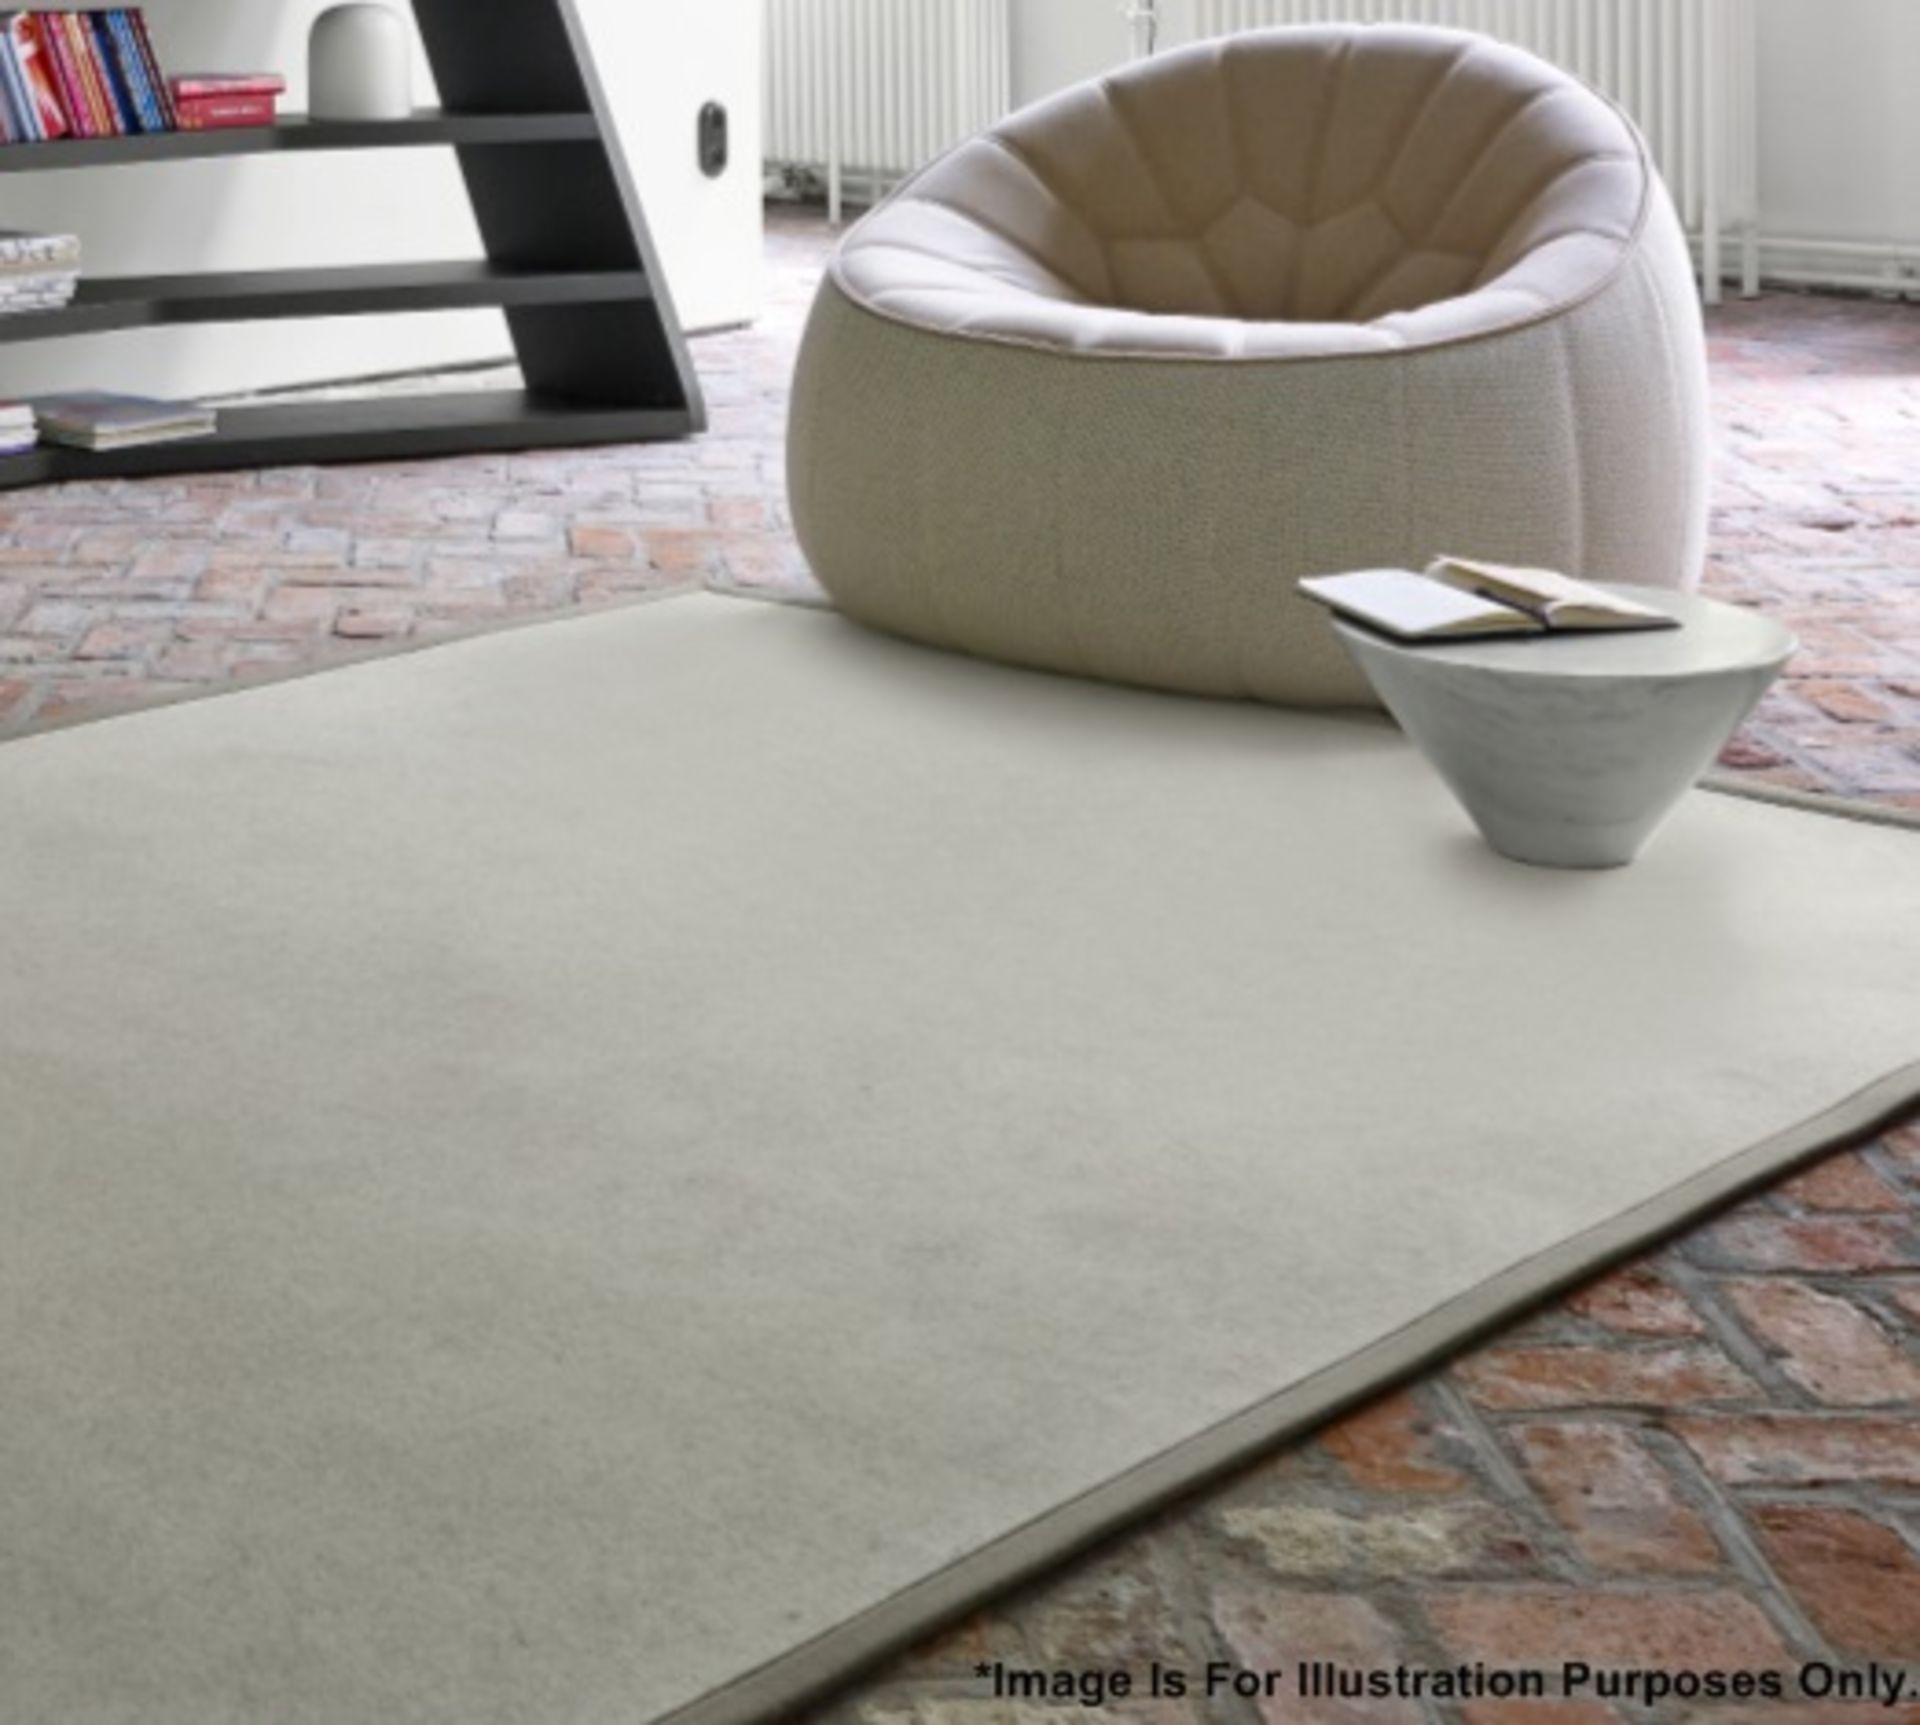 1 x LIGNE ROSET Chabraque Rug - Colour: Grege (Light Grey), With Tupe Edges - See Pictures - - Image 3 of 6